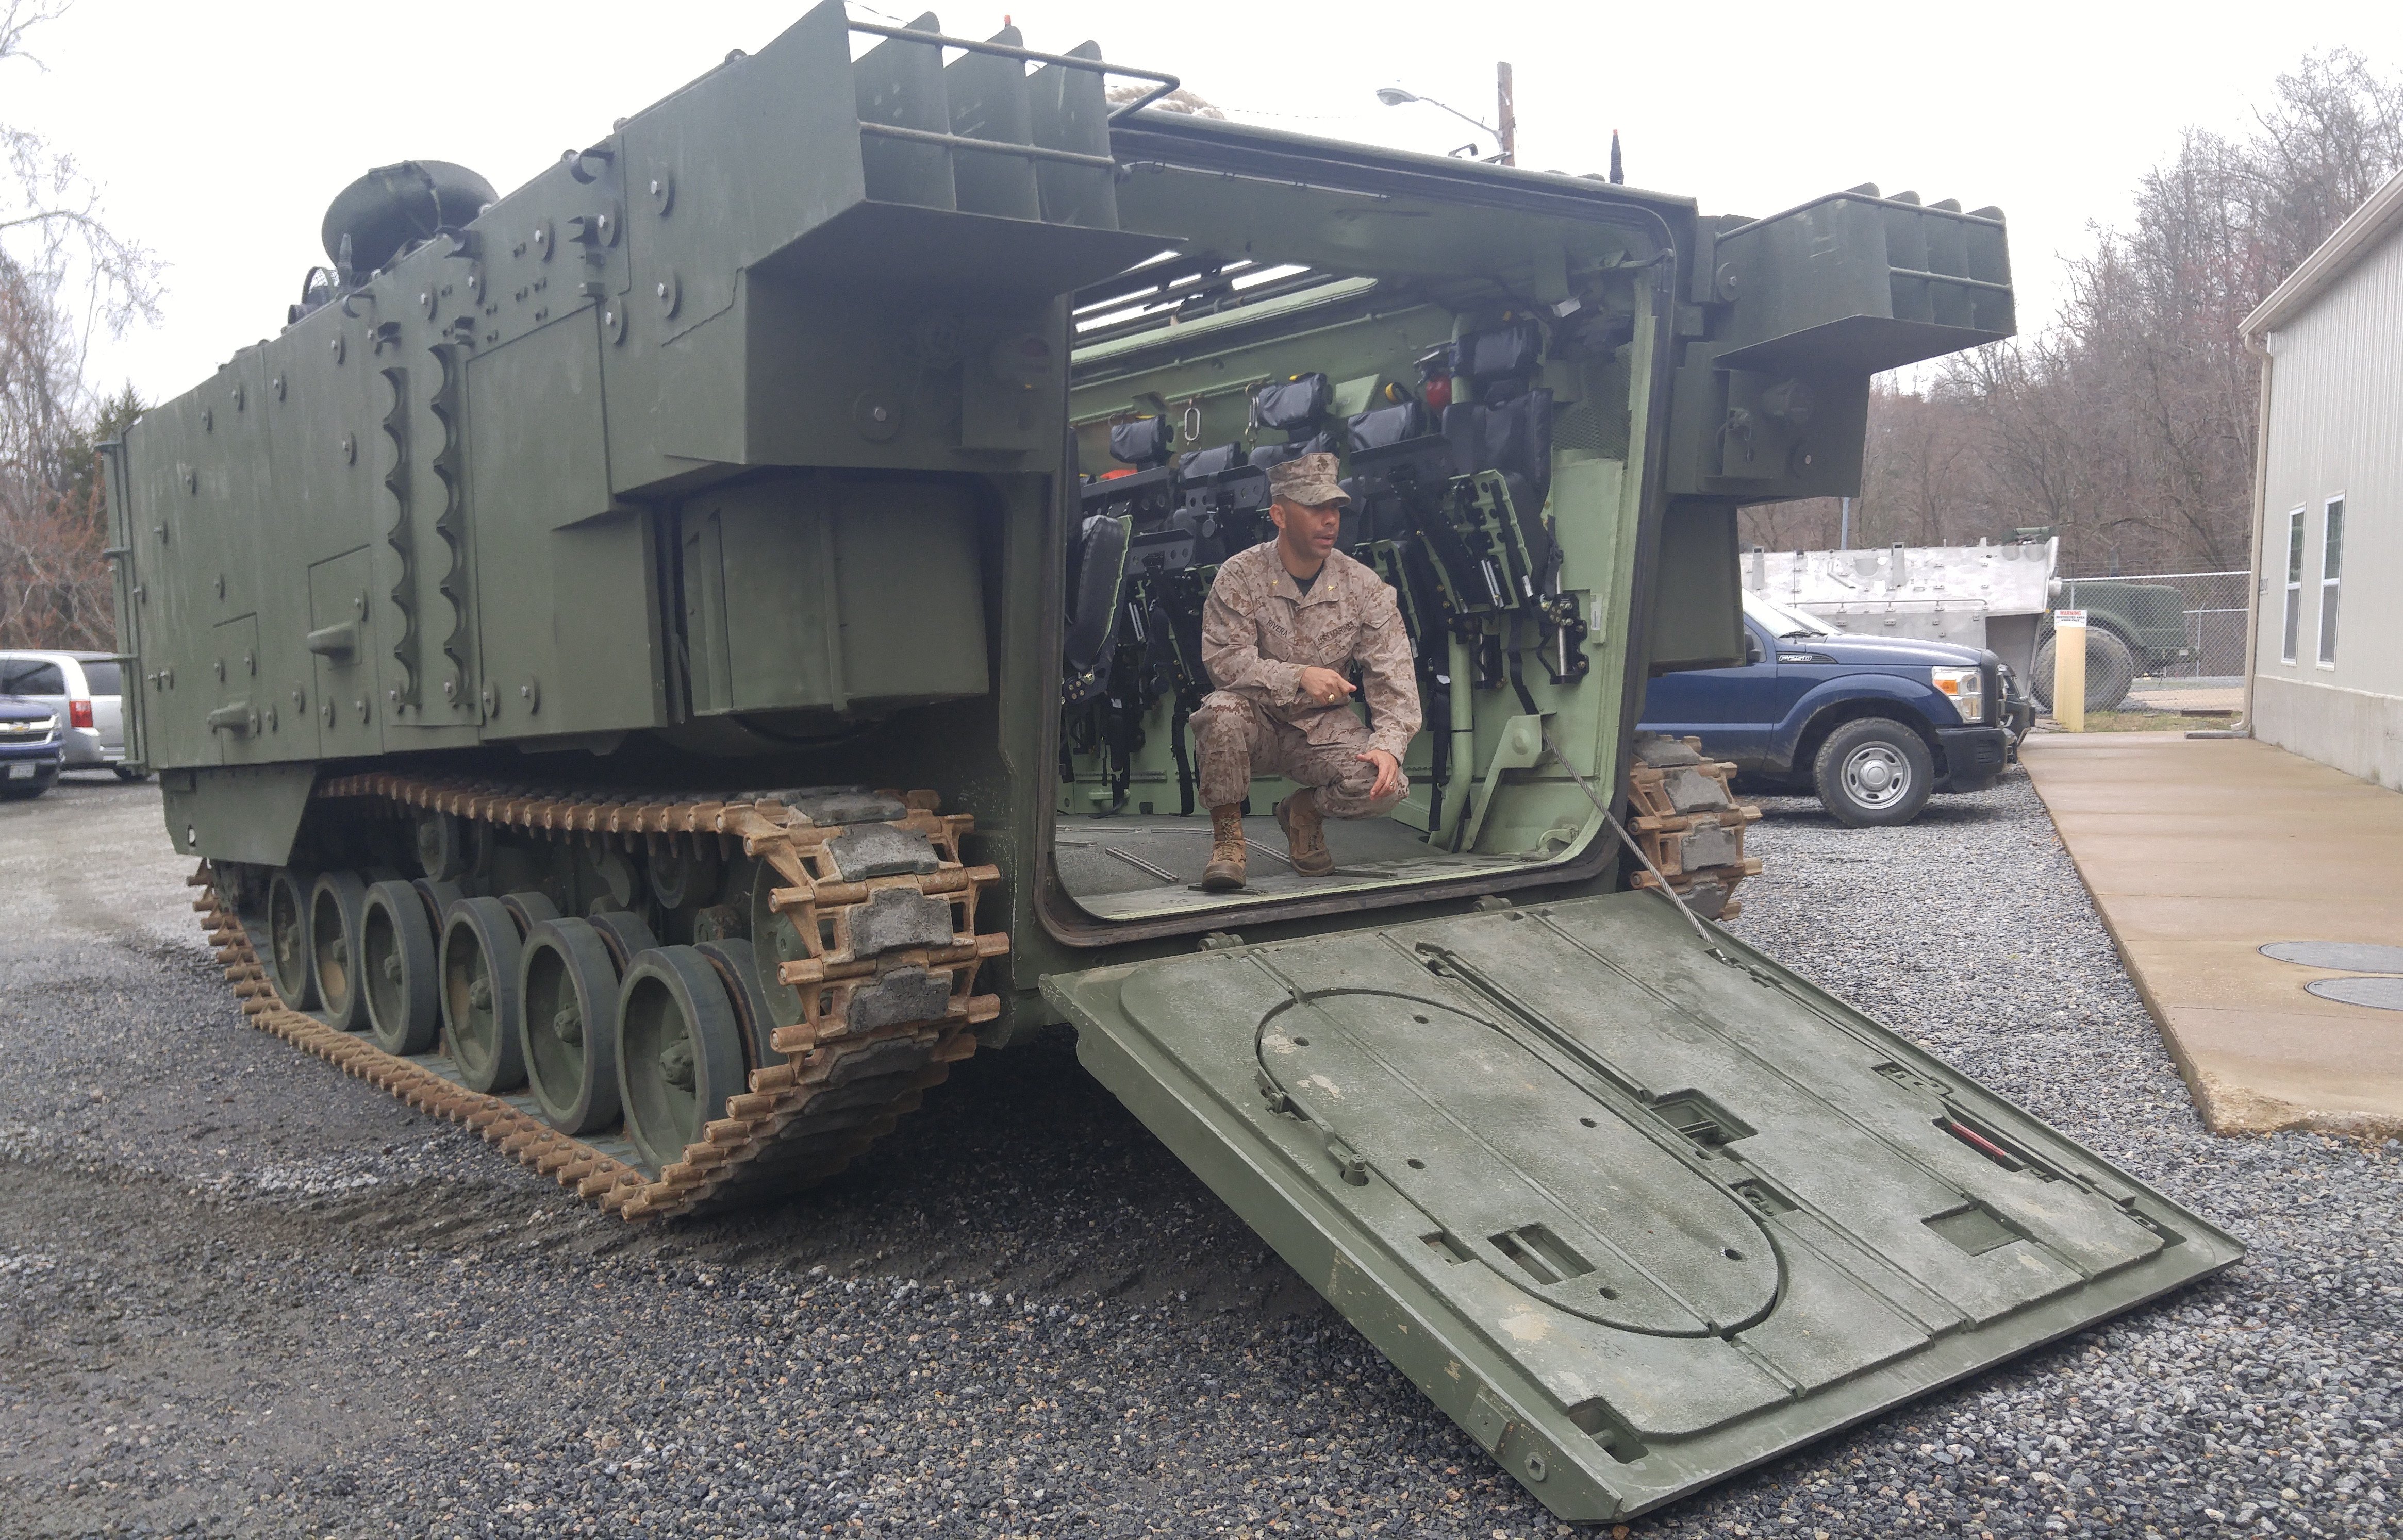 Amphibious Assault Vehicle Survivability Upgrade team lead Maj. Paul Rivera briefs media and program officials on the features of the first delivered vehicle near Marine Corps Base Quantico on March 15, 2016. USNI News photo.